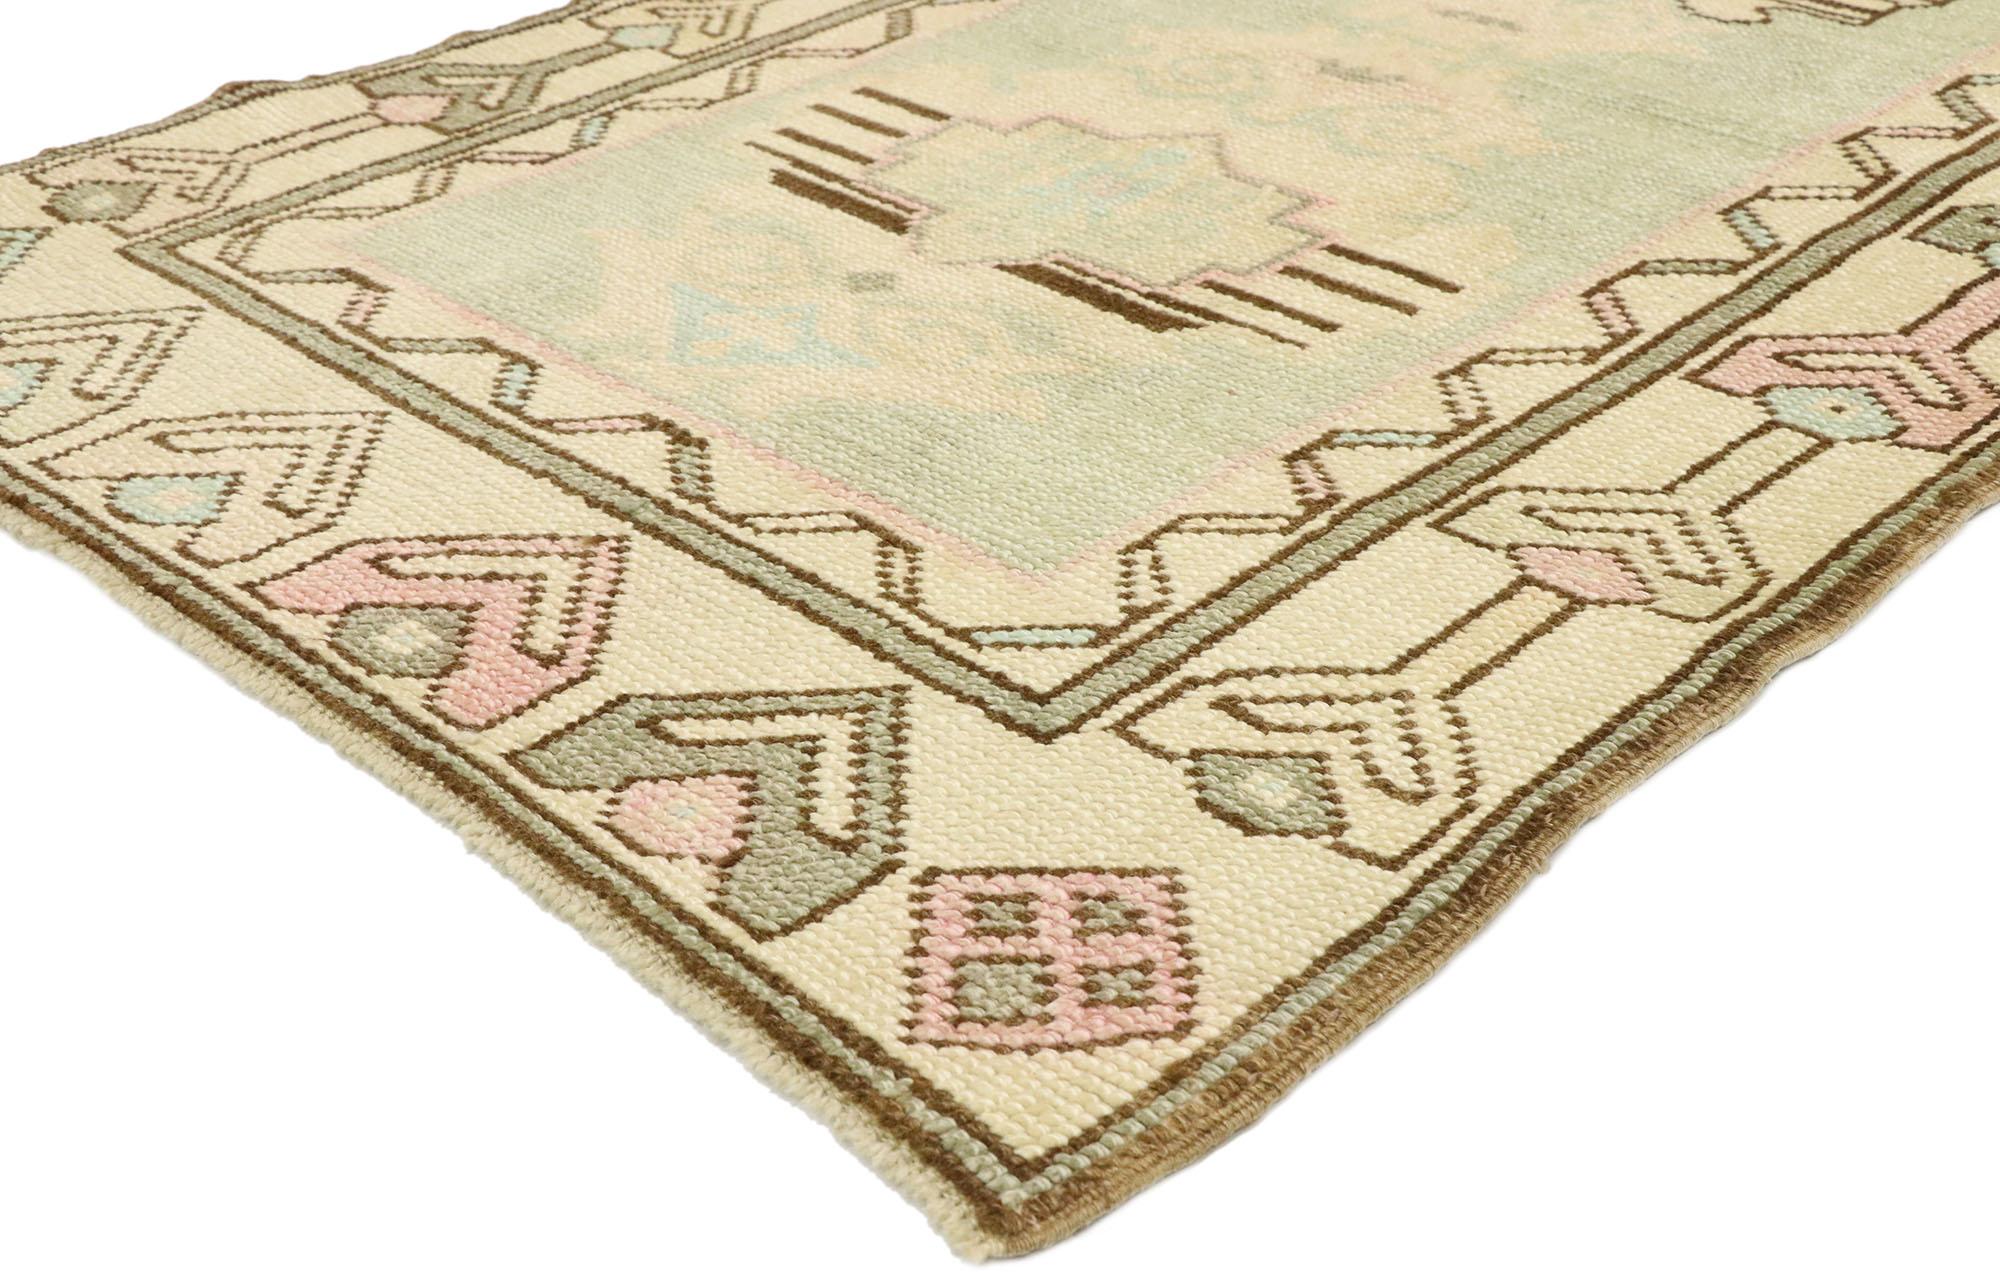 52911, vintage Turkish Oushak rug with Romantic Georgian Cottage French style 02'11 x 05'02. Soft, bespoke vibes meet Georgian Country Cottage style in this hand knotted wool vintage Turkish Oushak rug. The celadon antique washed field beautifully